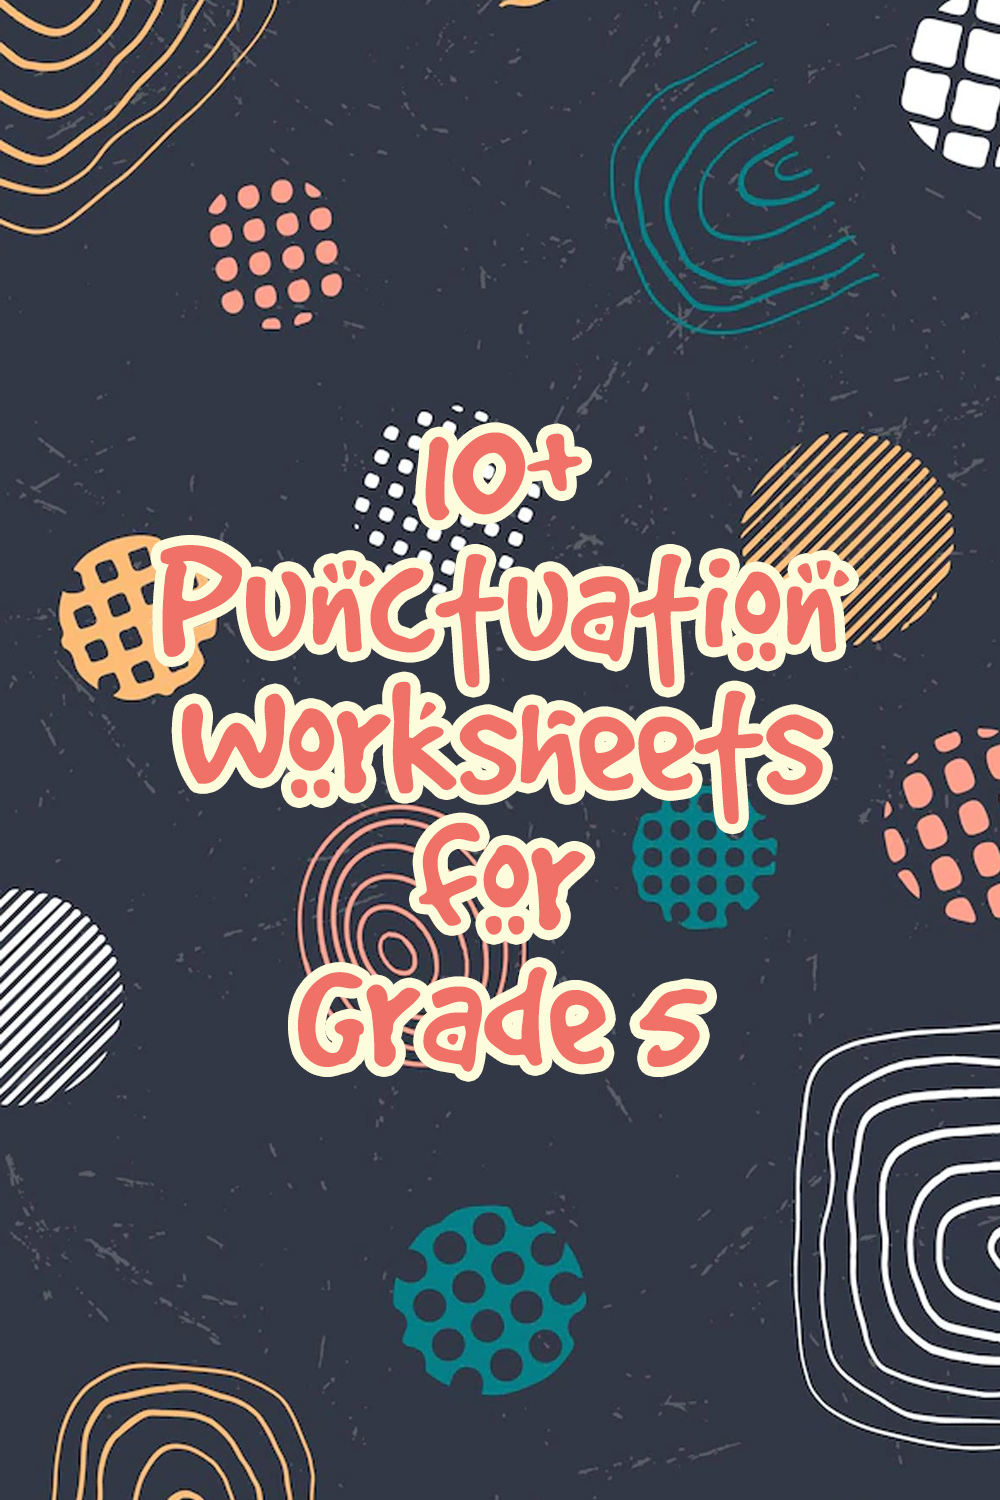 Punctuation Worksheets for Grade 5